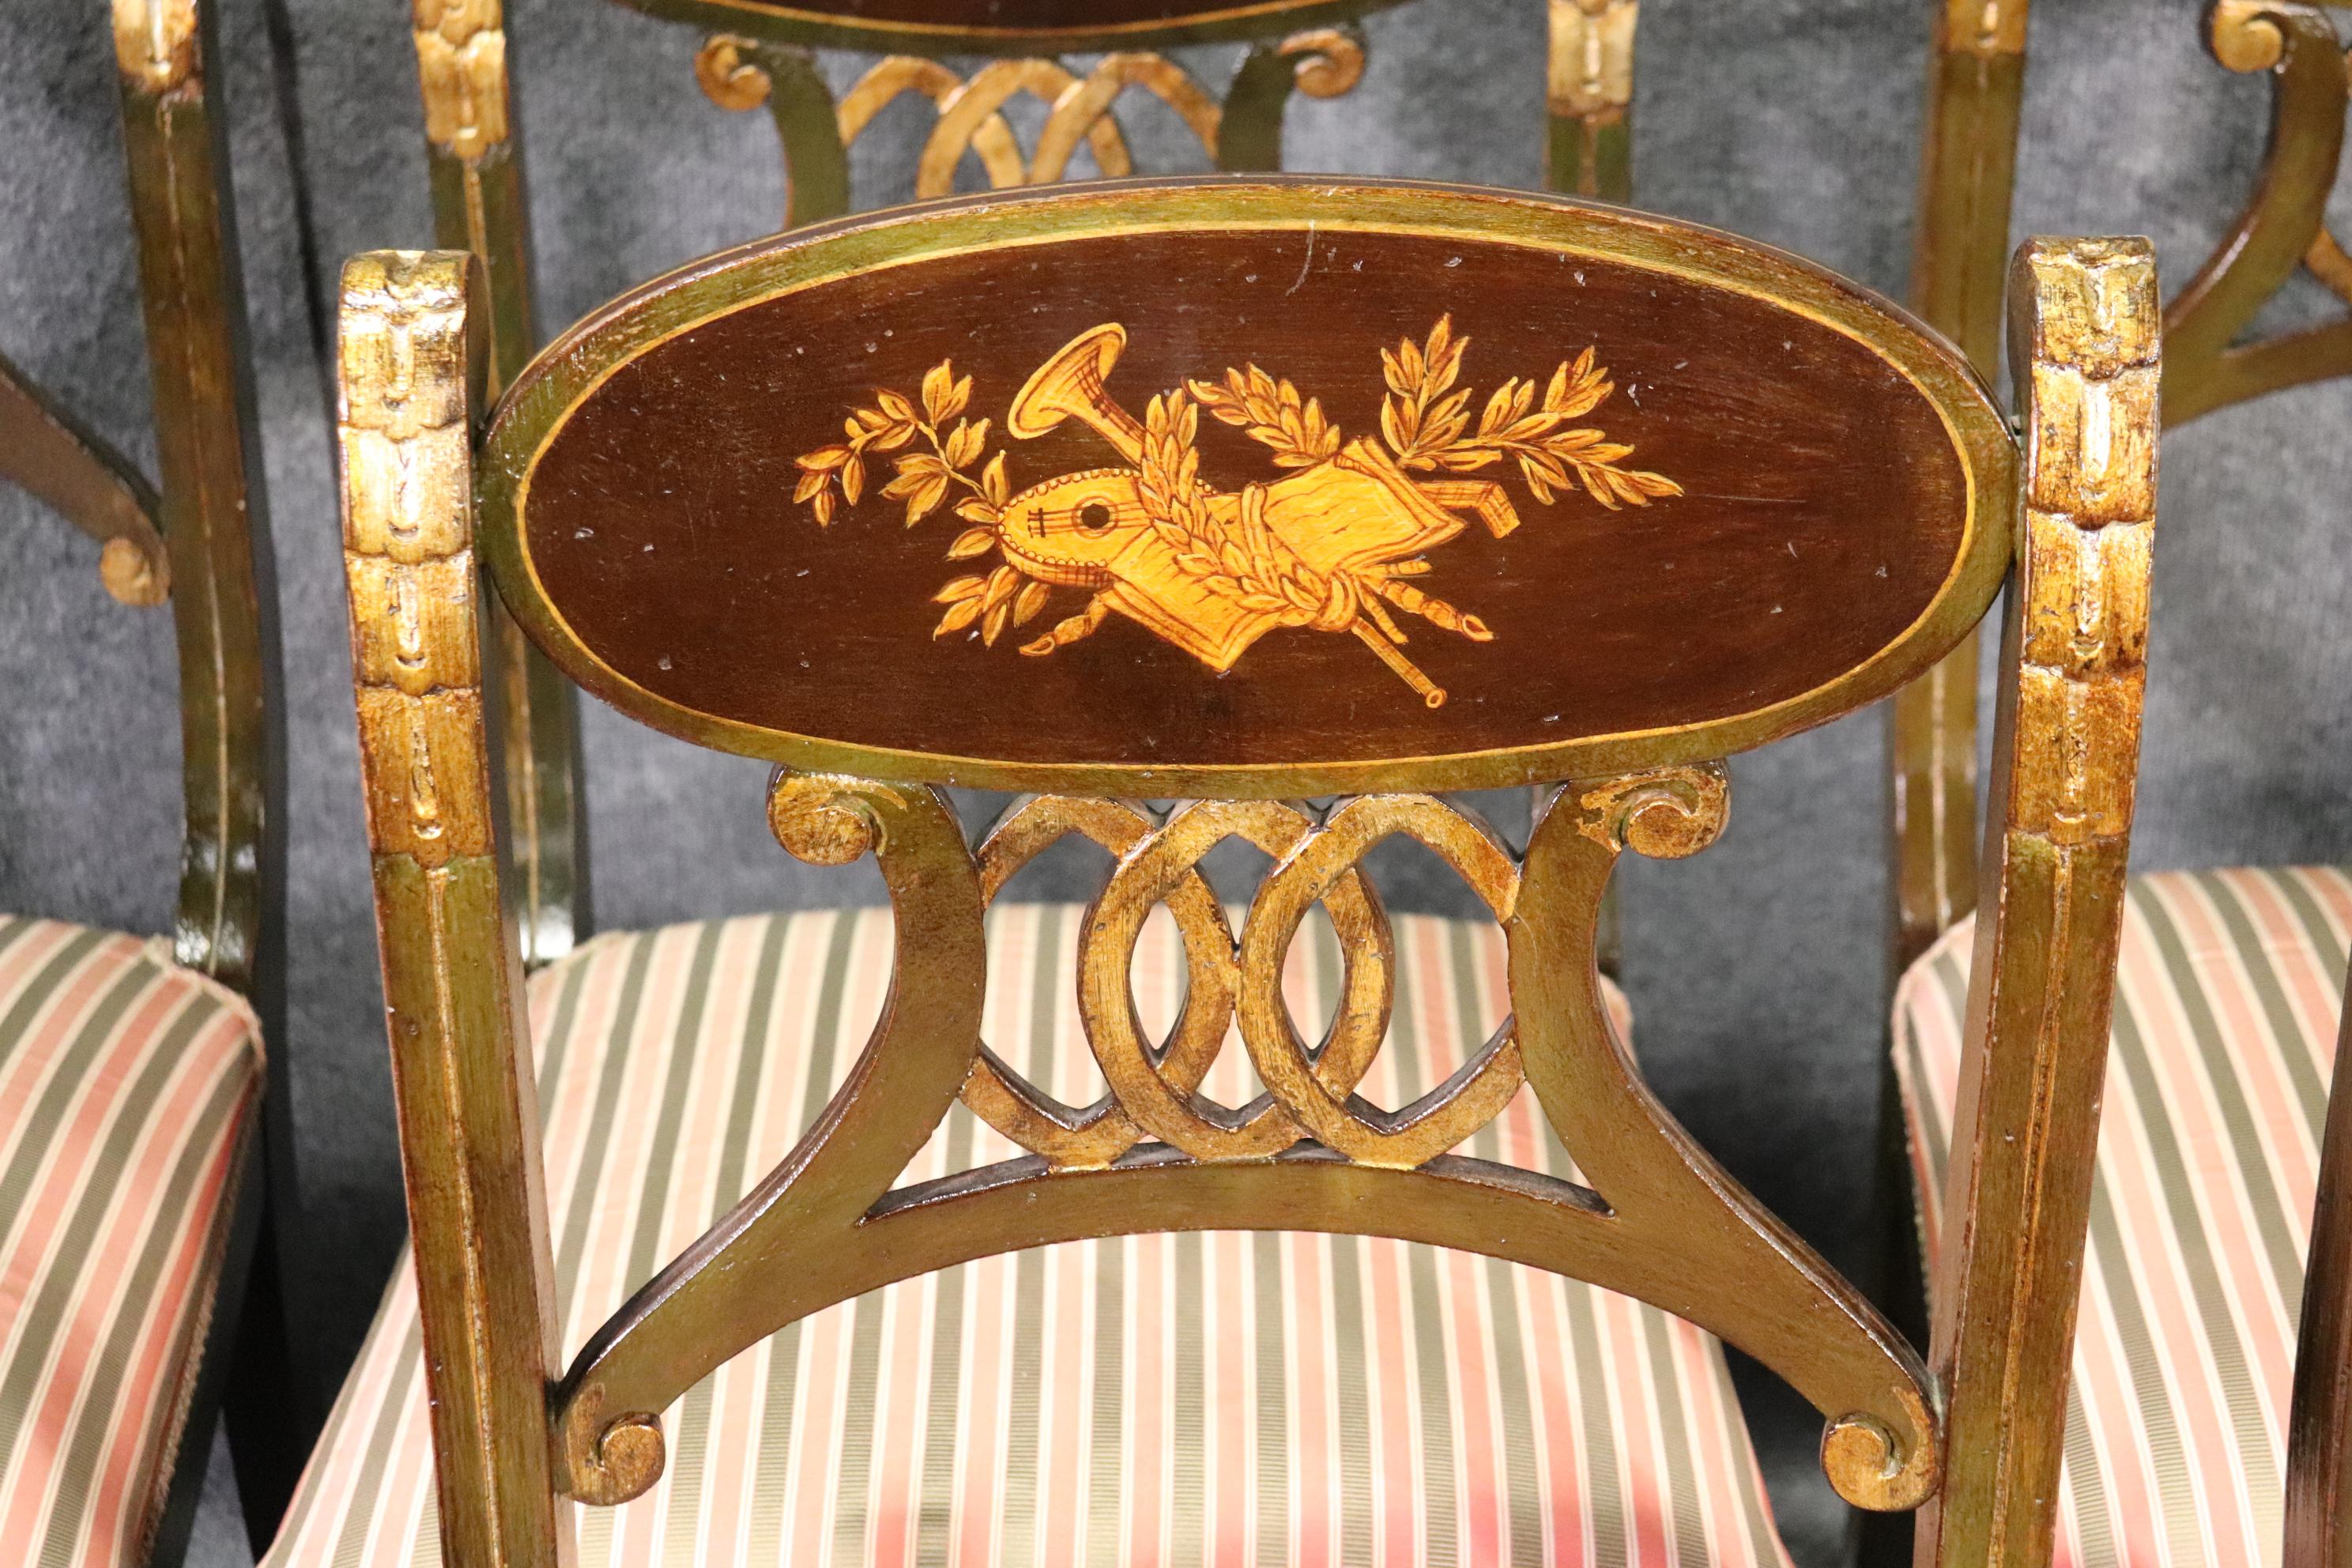 Regency Revival Set 8 Painted and Gilded Regency Style Dining Chairs with Musical Instruments 